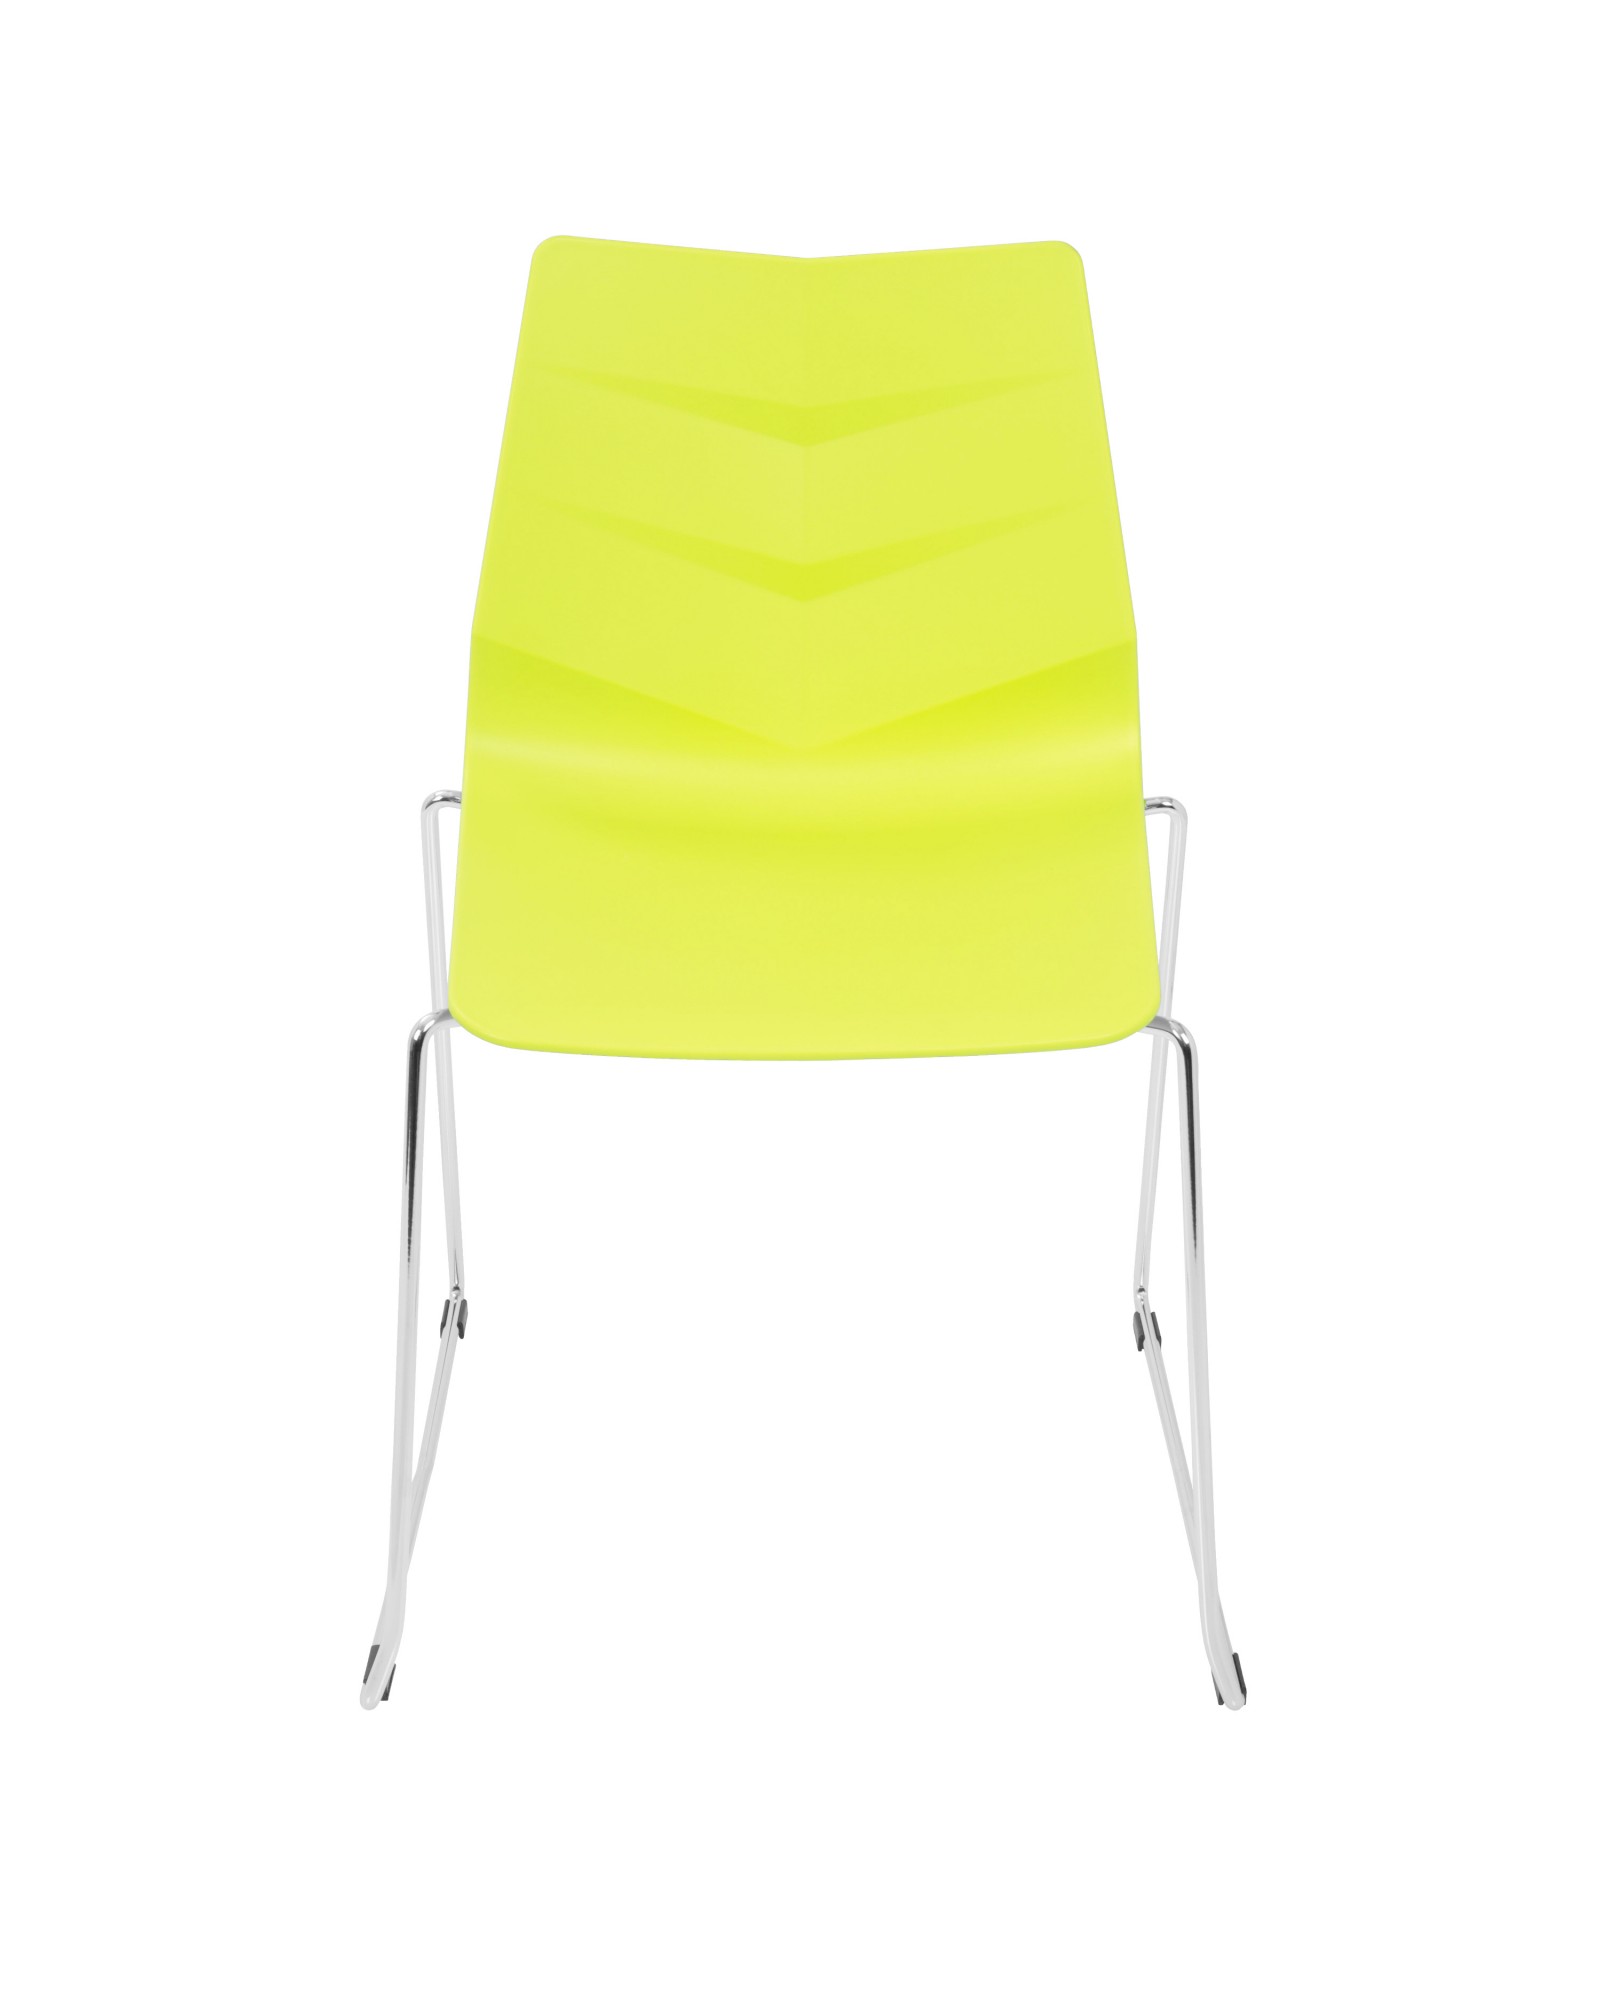 Arrow Contemporary Dining Chair in Lime Green - Set of 2